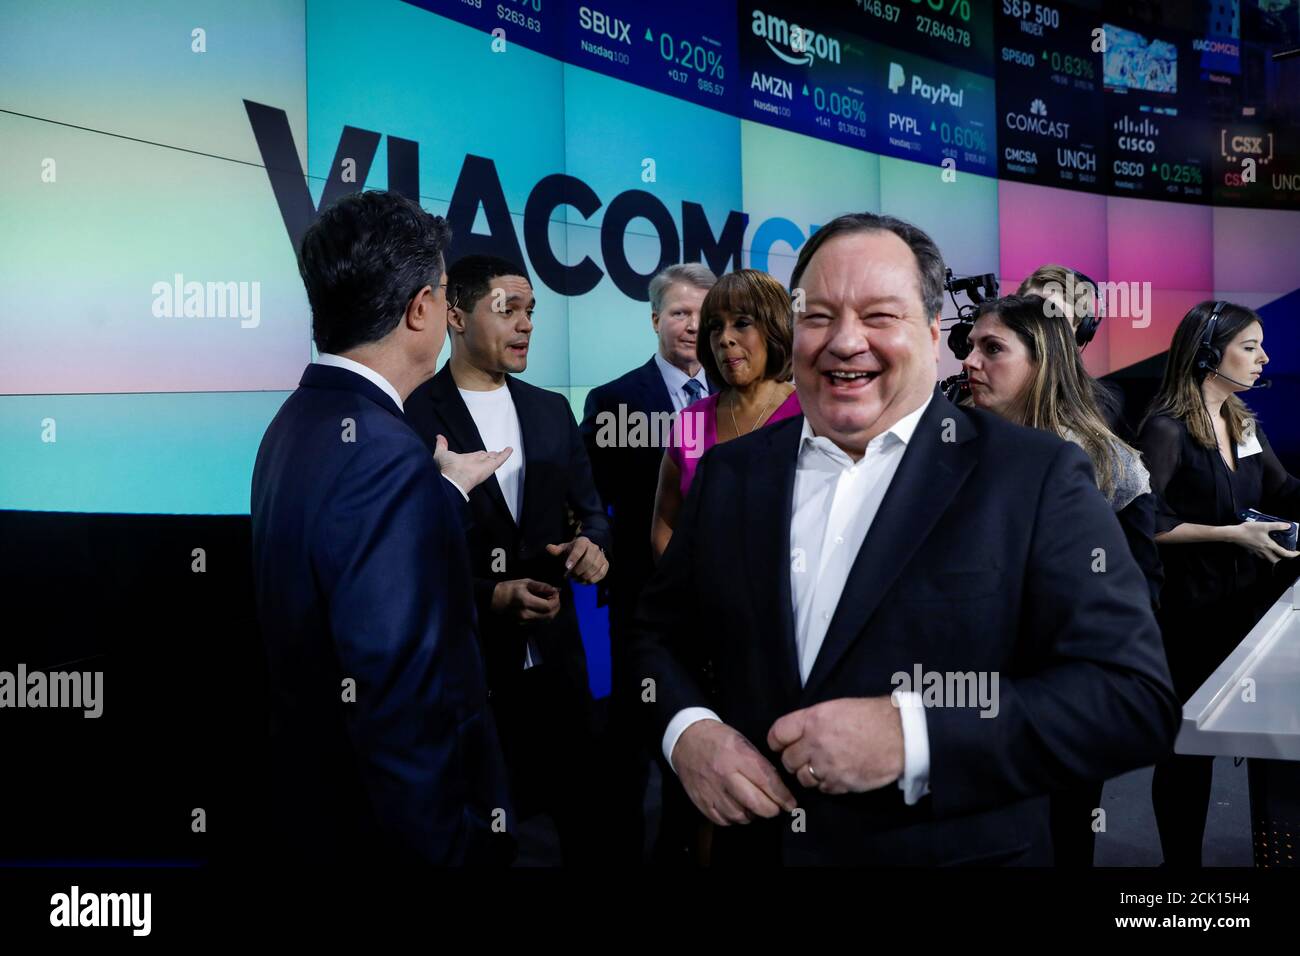 Robert Bakish, President and CEO of ViacomCBS, reacts before ringing the opening bell to celebrate his company's merger, at the Nasdaq MarketSite in New York, U.S., December 5, 2019. REUTERS/Brendan McDermid Stock Photo